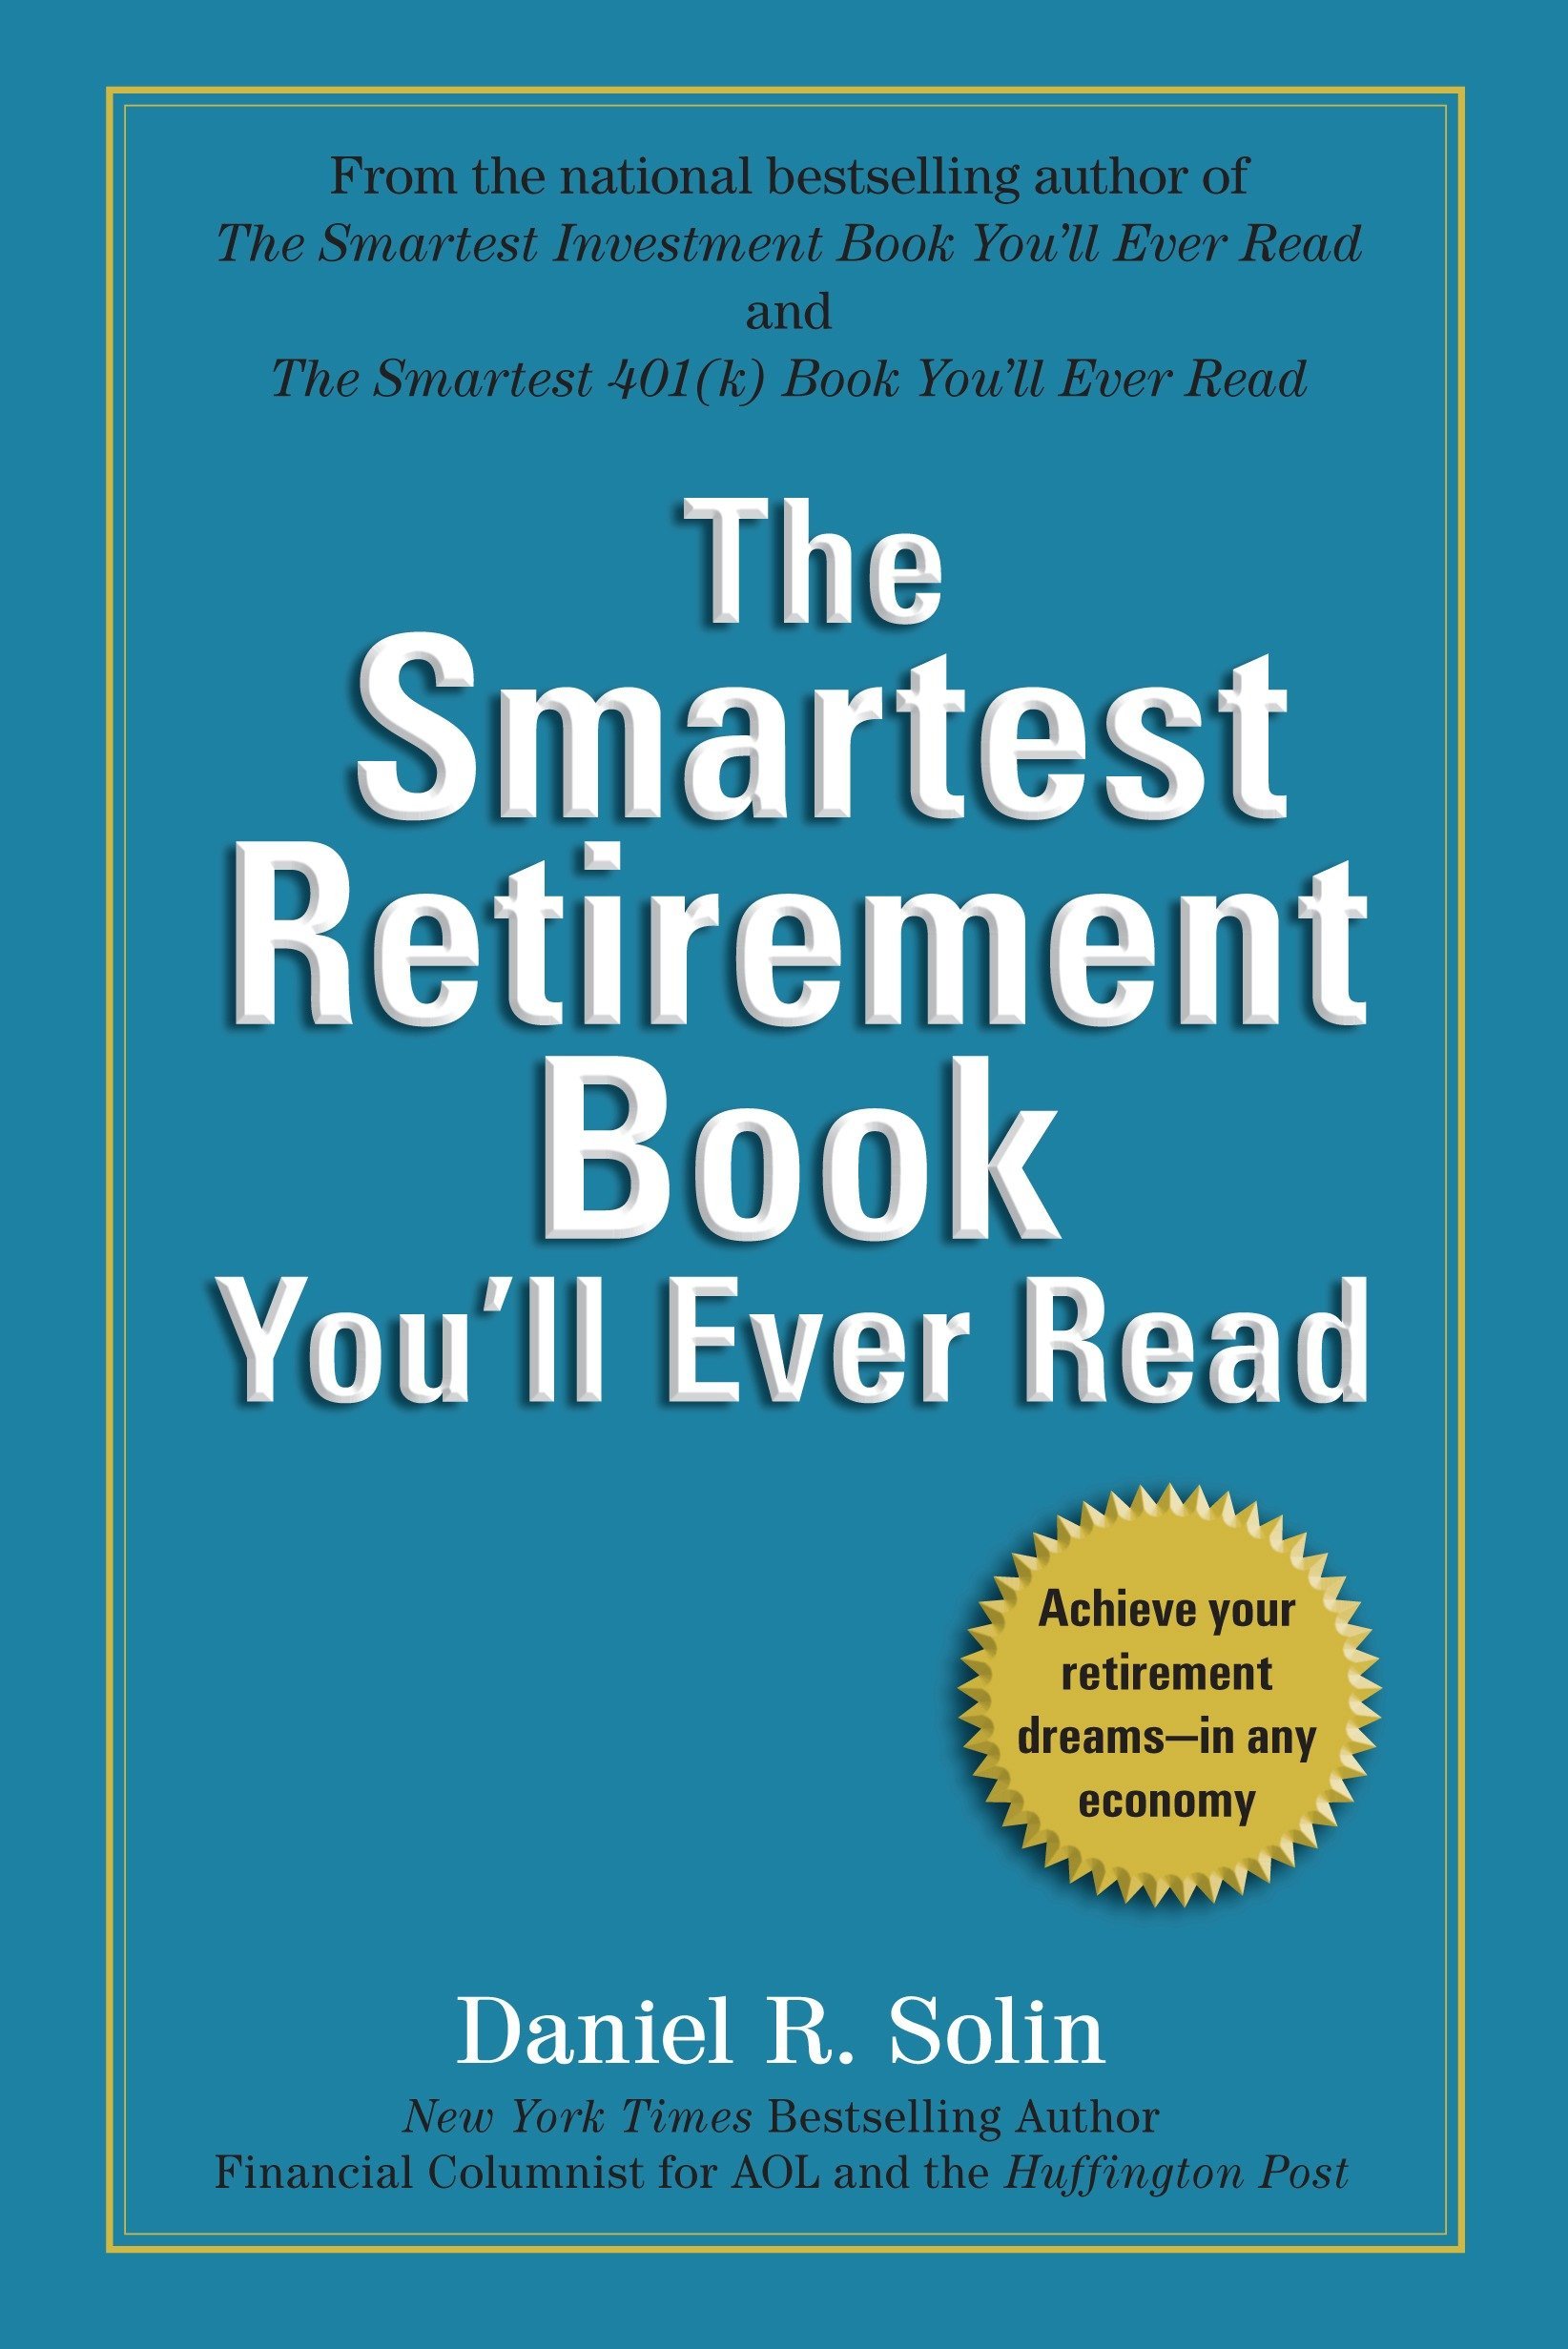 The Smartest Retirement Book You'll Ever Read by Daniel R. Solin